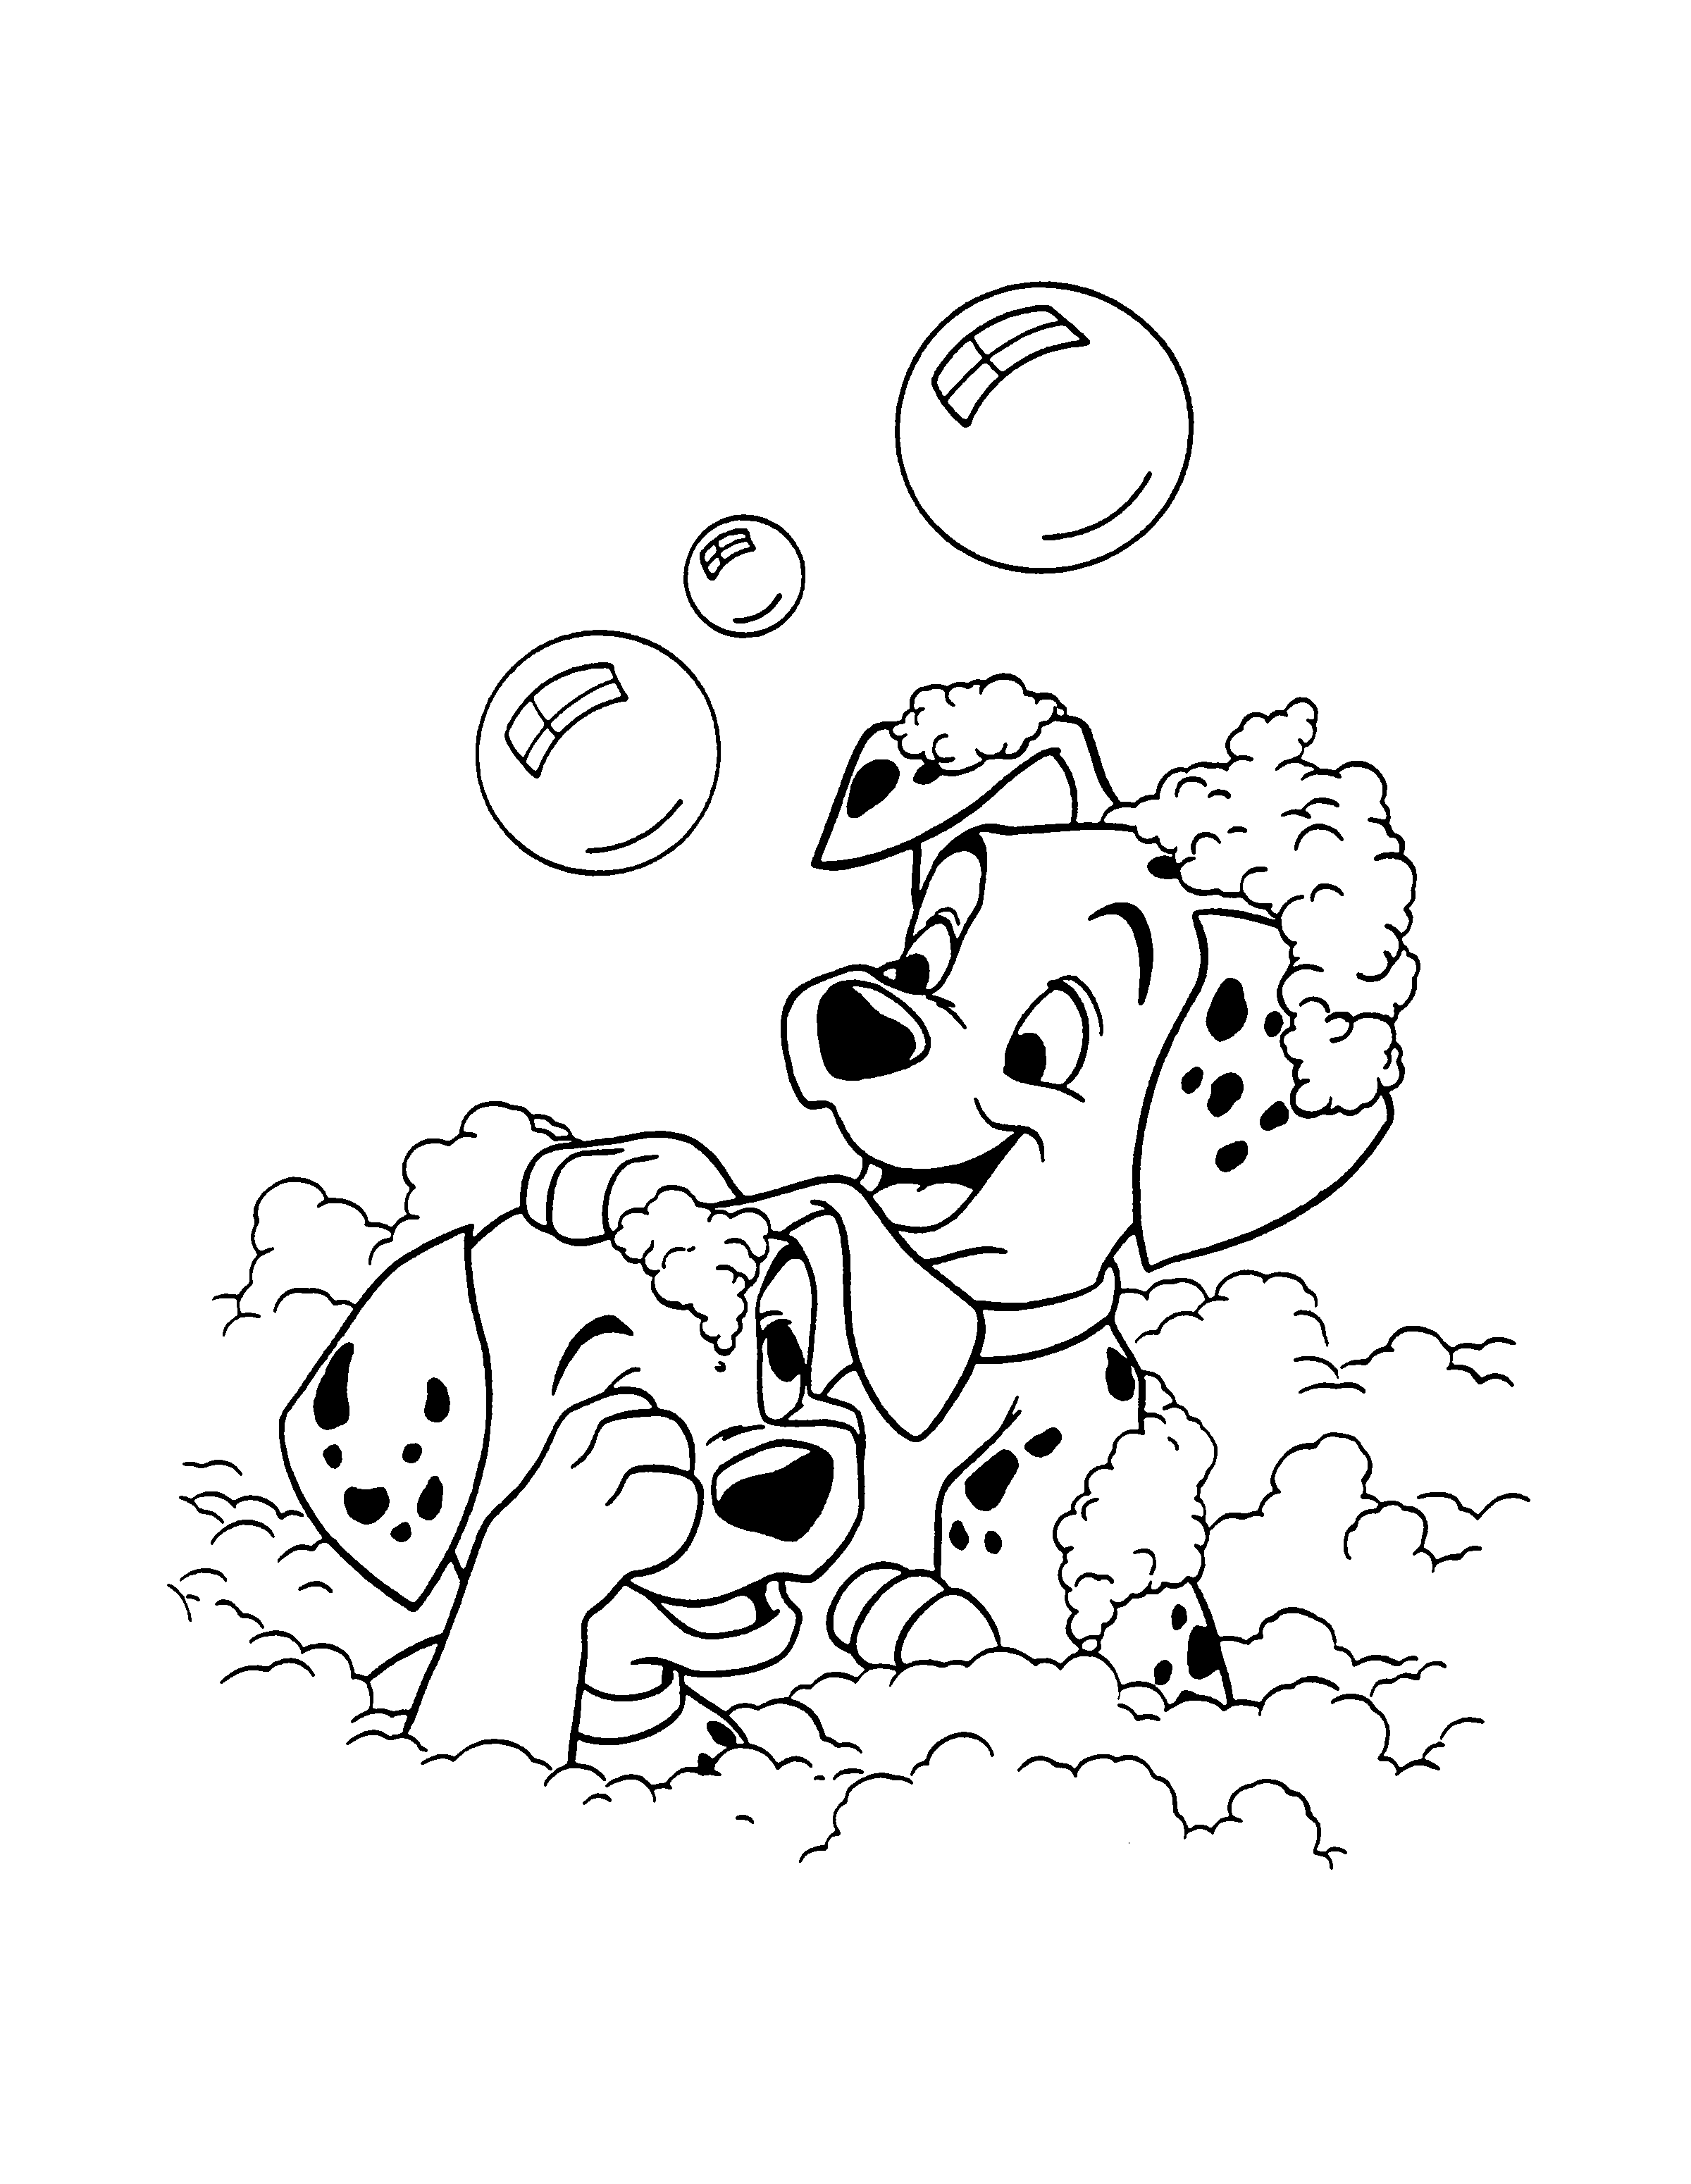 102 Dalmatians Coloring Pages Cartoons 102 dalmatiner DXefW Printable 2020 0142 Coloring4free